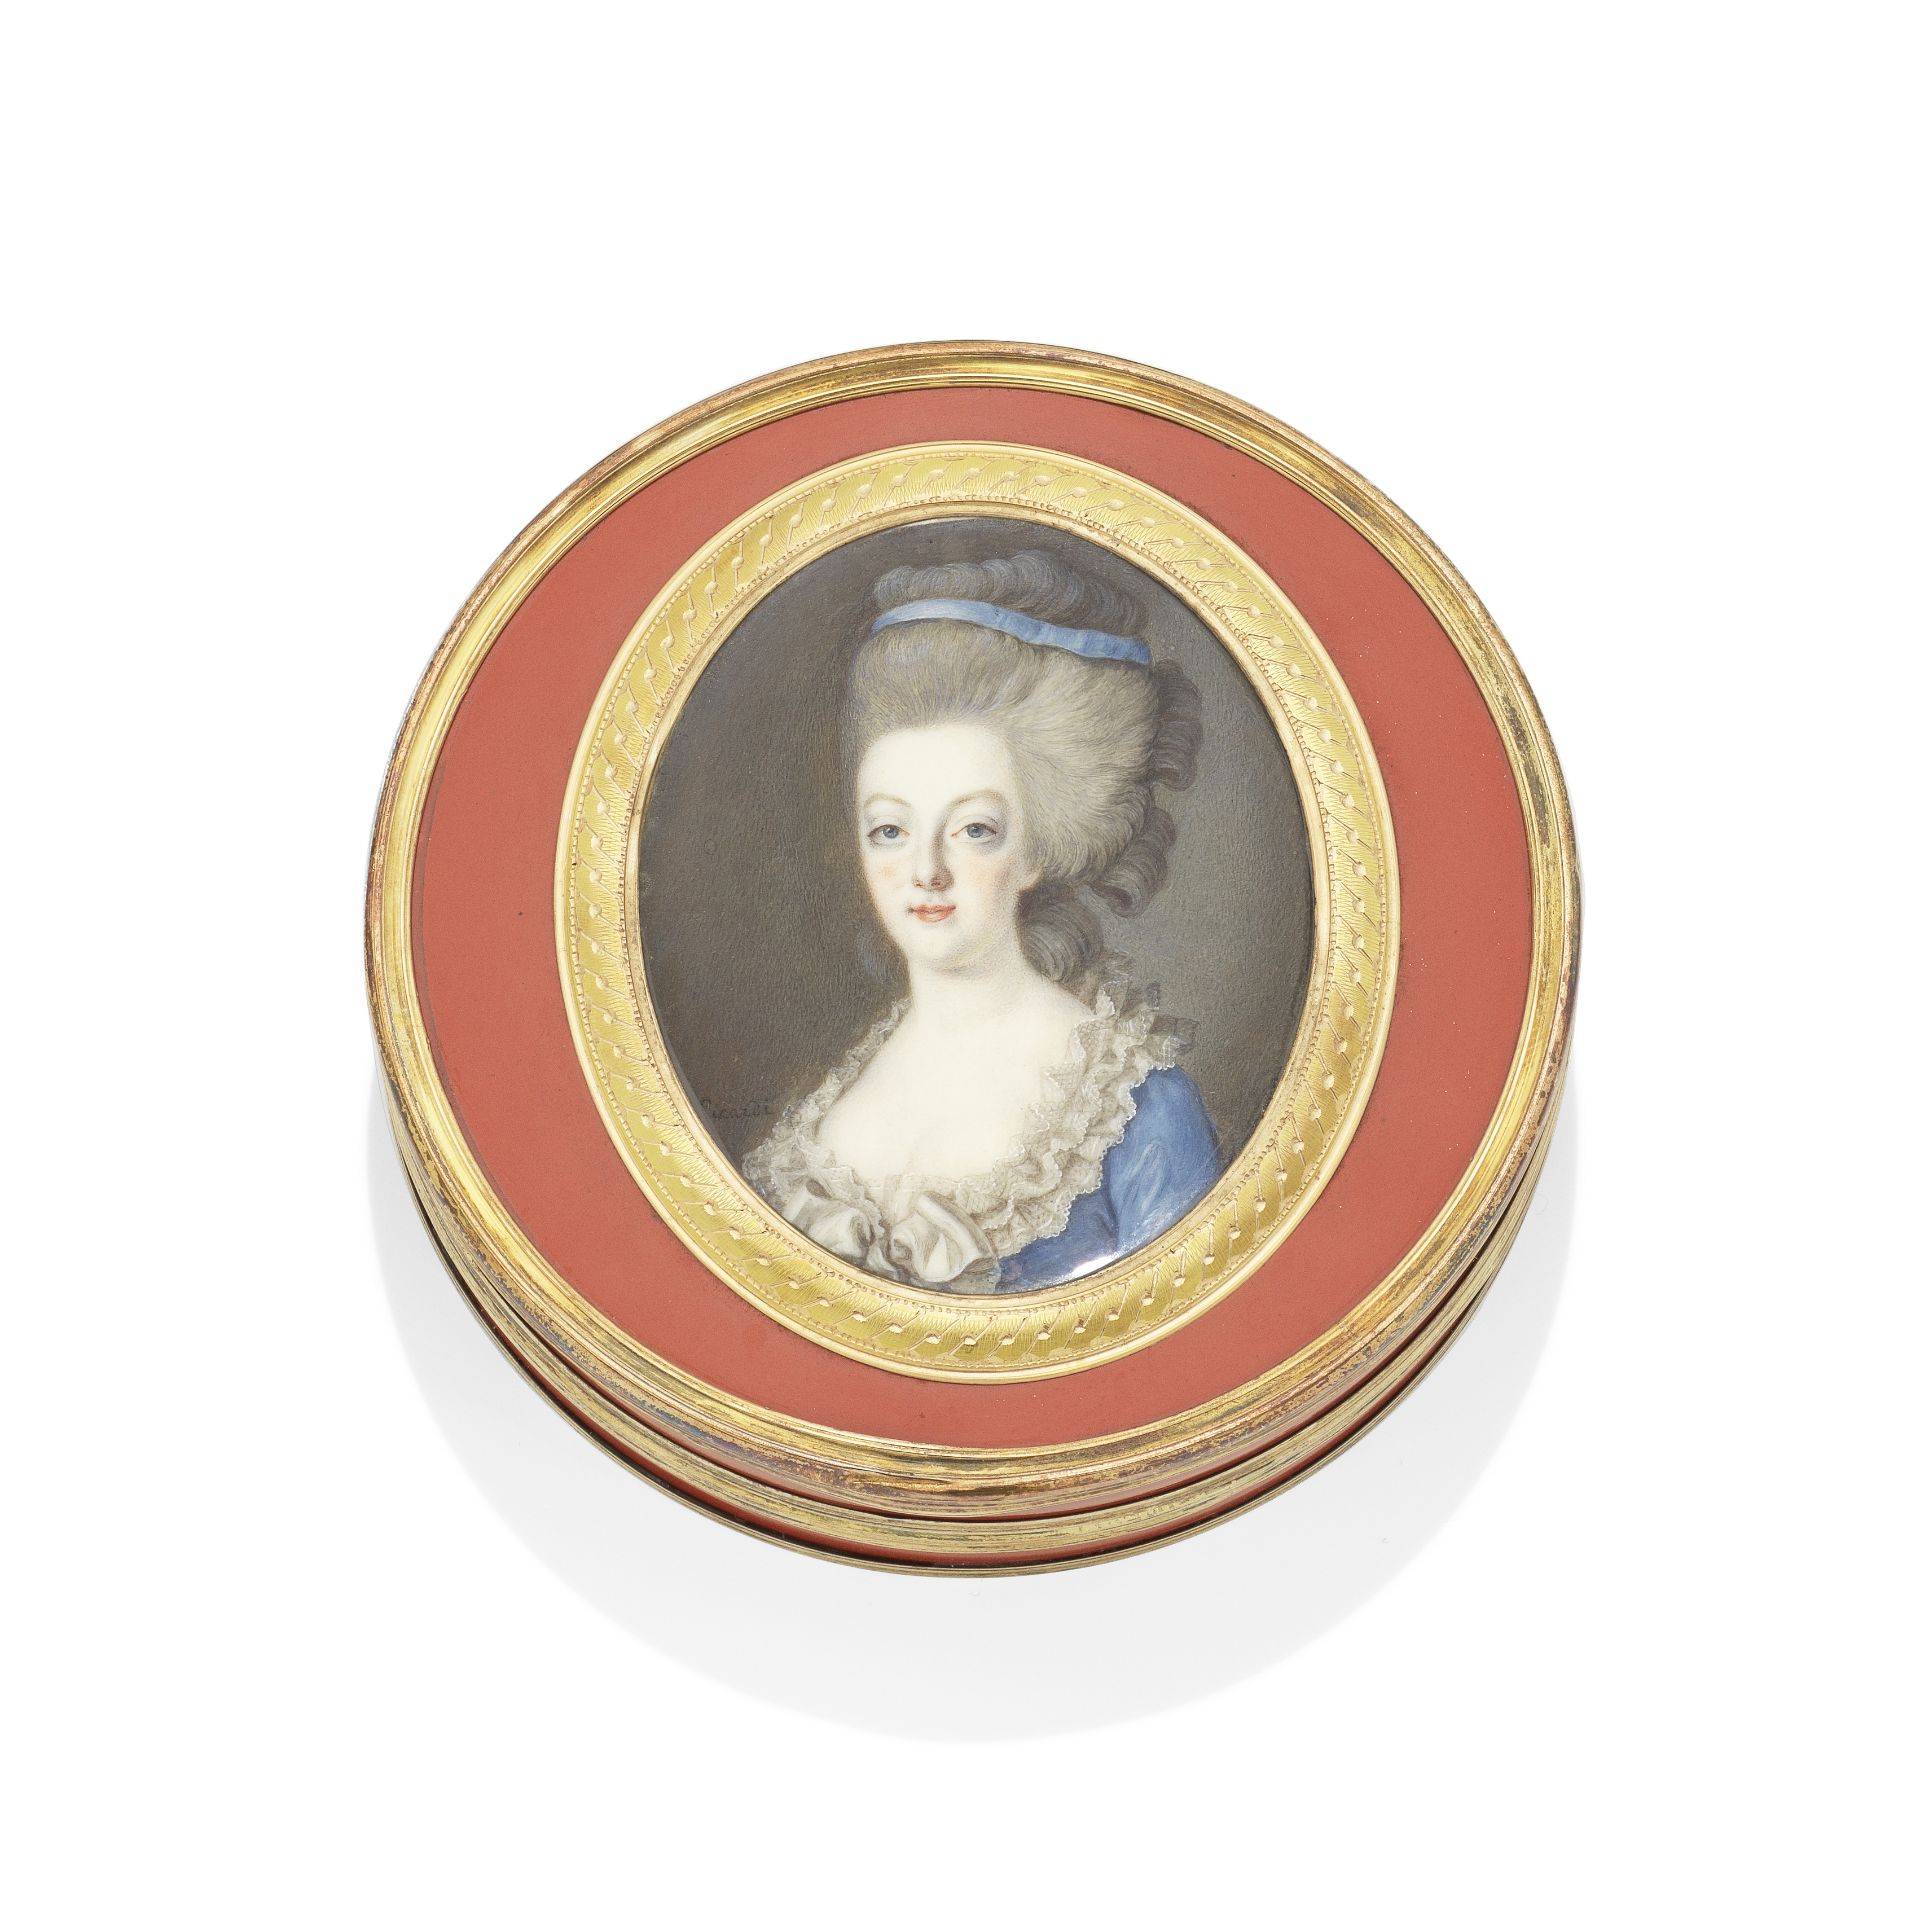 LOUIS-MARIE SICARDI (FRENCH, 1746-1825): A PORTRAIT MINIATURE OF QUEEN MARIE ANTOINETTE OF FRANCE